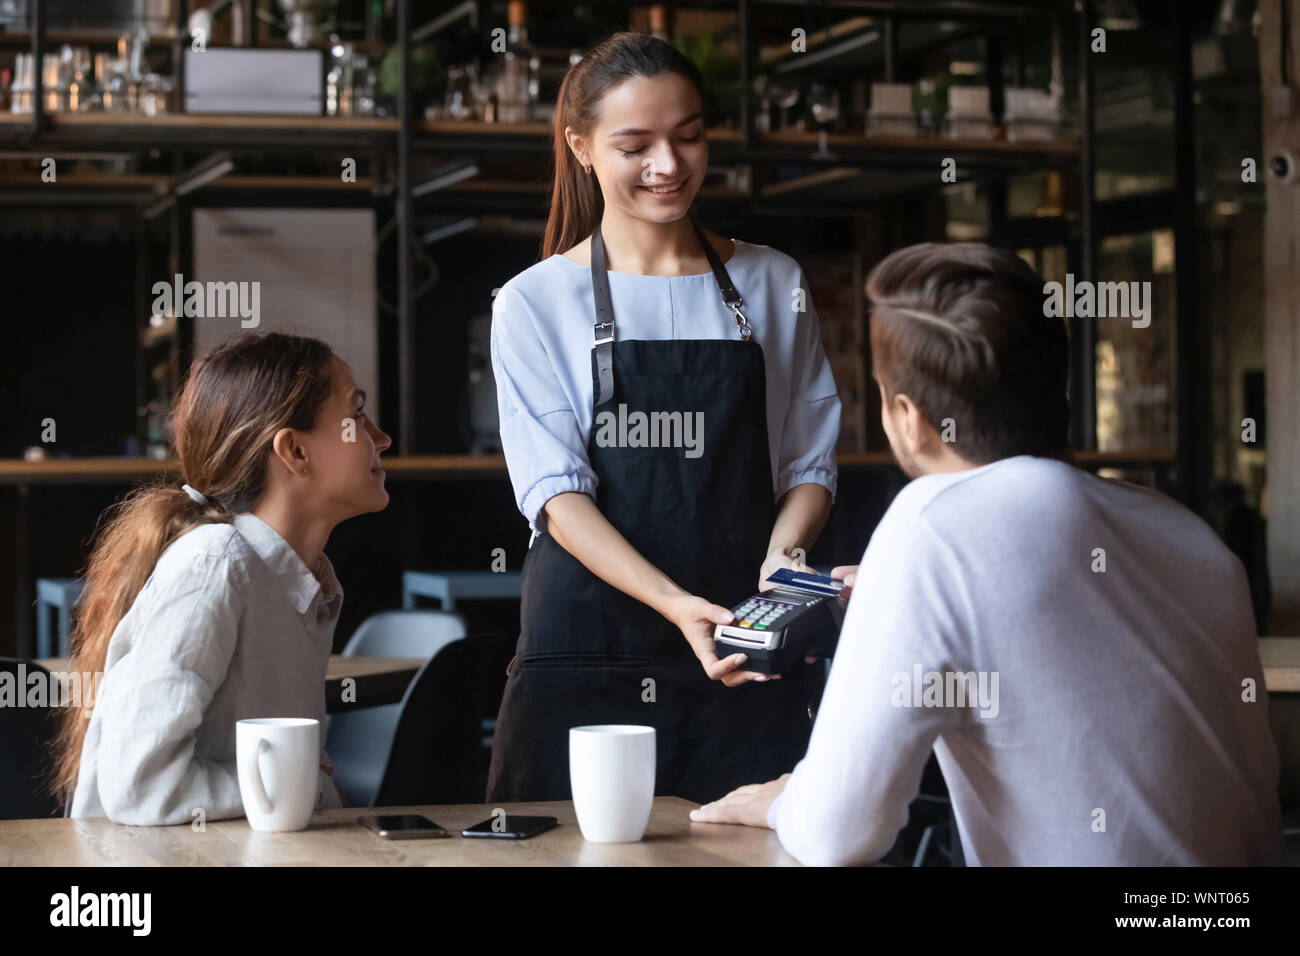 Customer paying by contactless credit card, attractive waitress holding reader Stock Photo